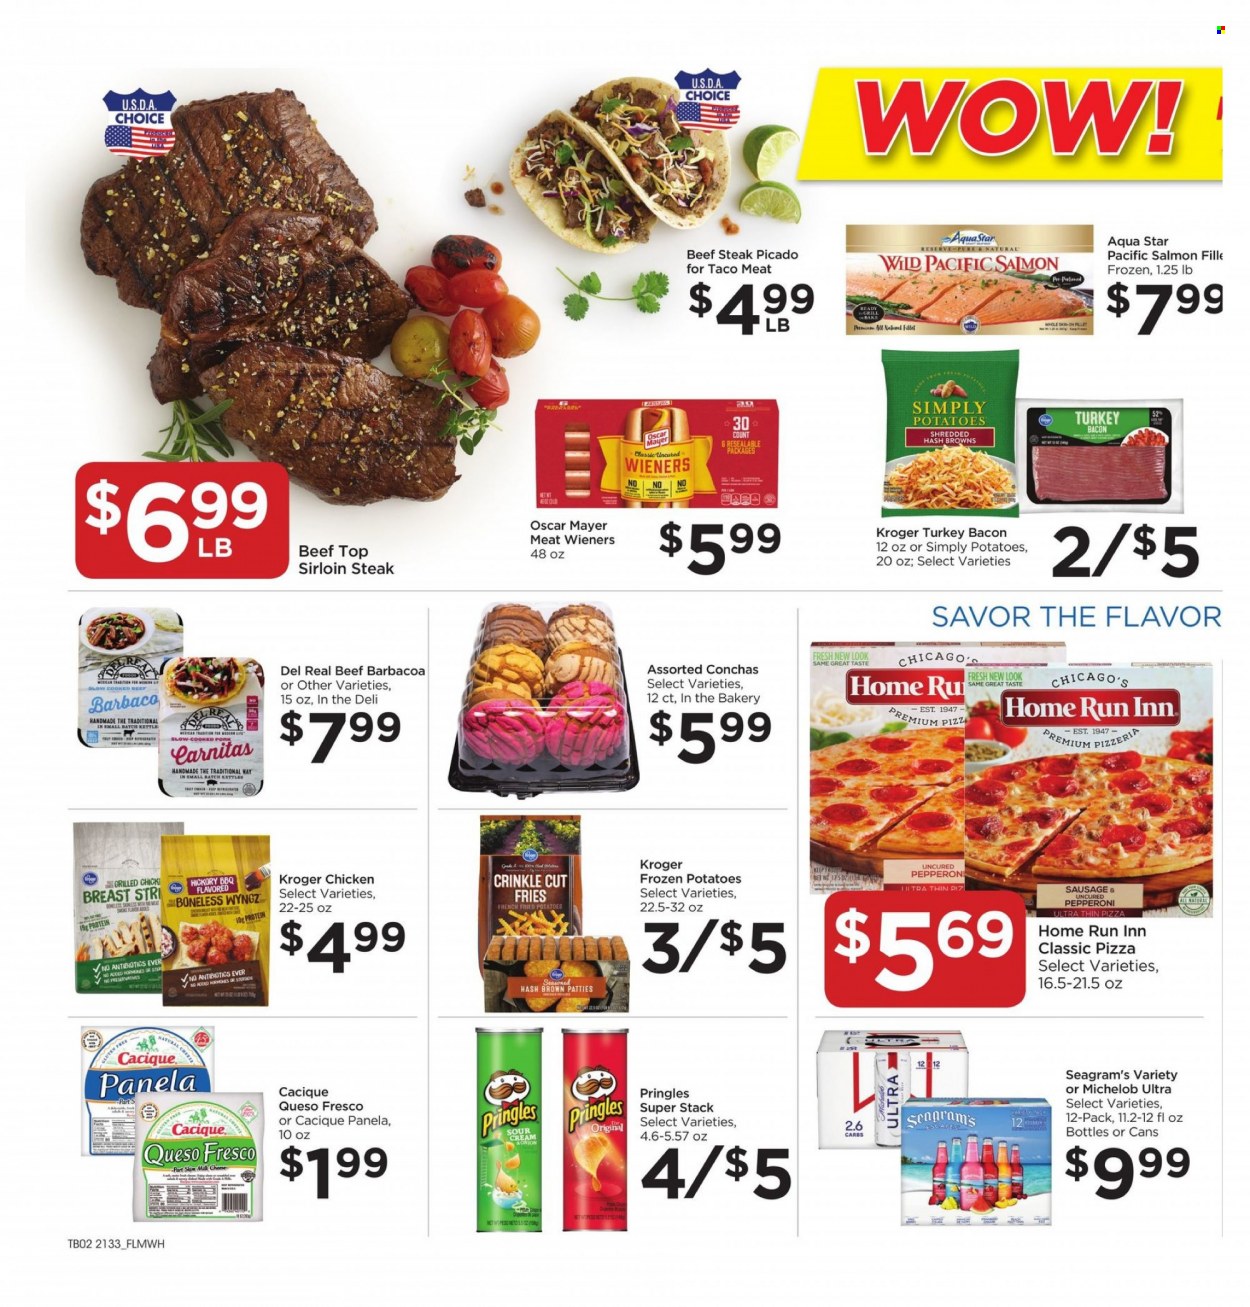 thumbnail - Food 4 Less Flyer - 09/15/2021 - 09/21/2021 - Sales products - potatoes, salmon, pizza, bacon, turkey bacon, Oscar Mayer, sausage, pepperoni, queso fresco, potato fries, Pringles, beer, beef meat, beef sirloin, beef steak, steak, sirloin steak, Michelob. Page 2.